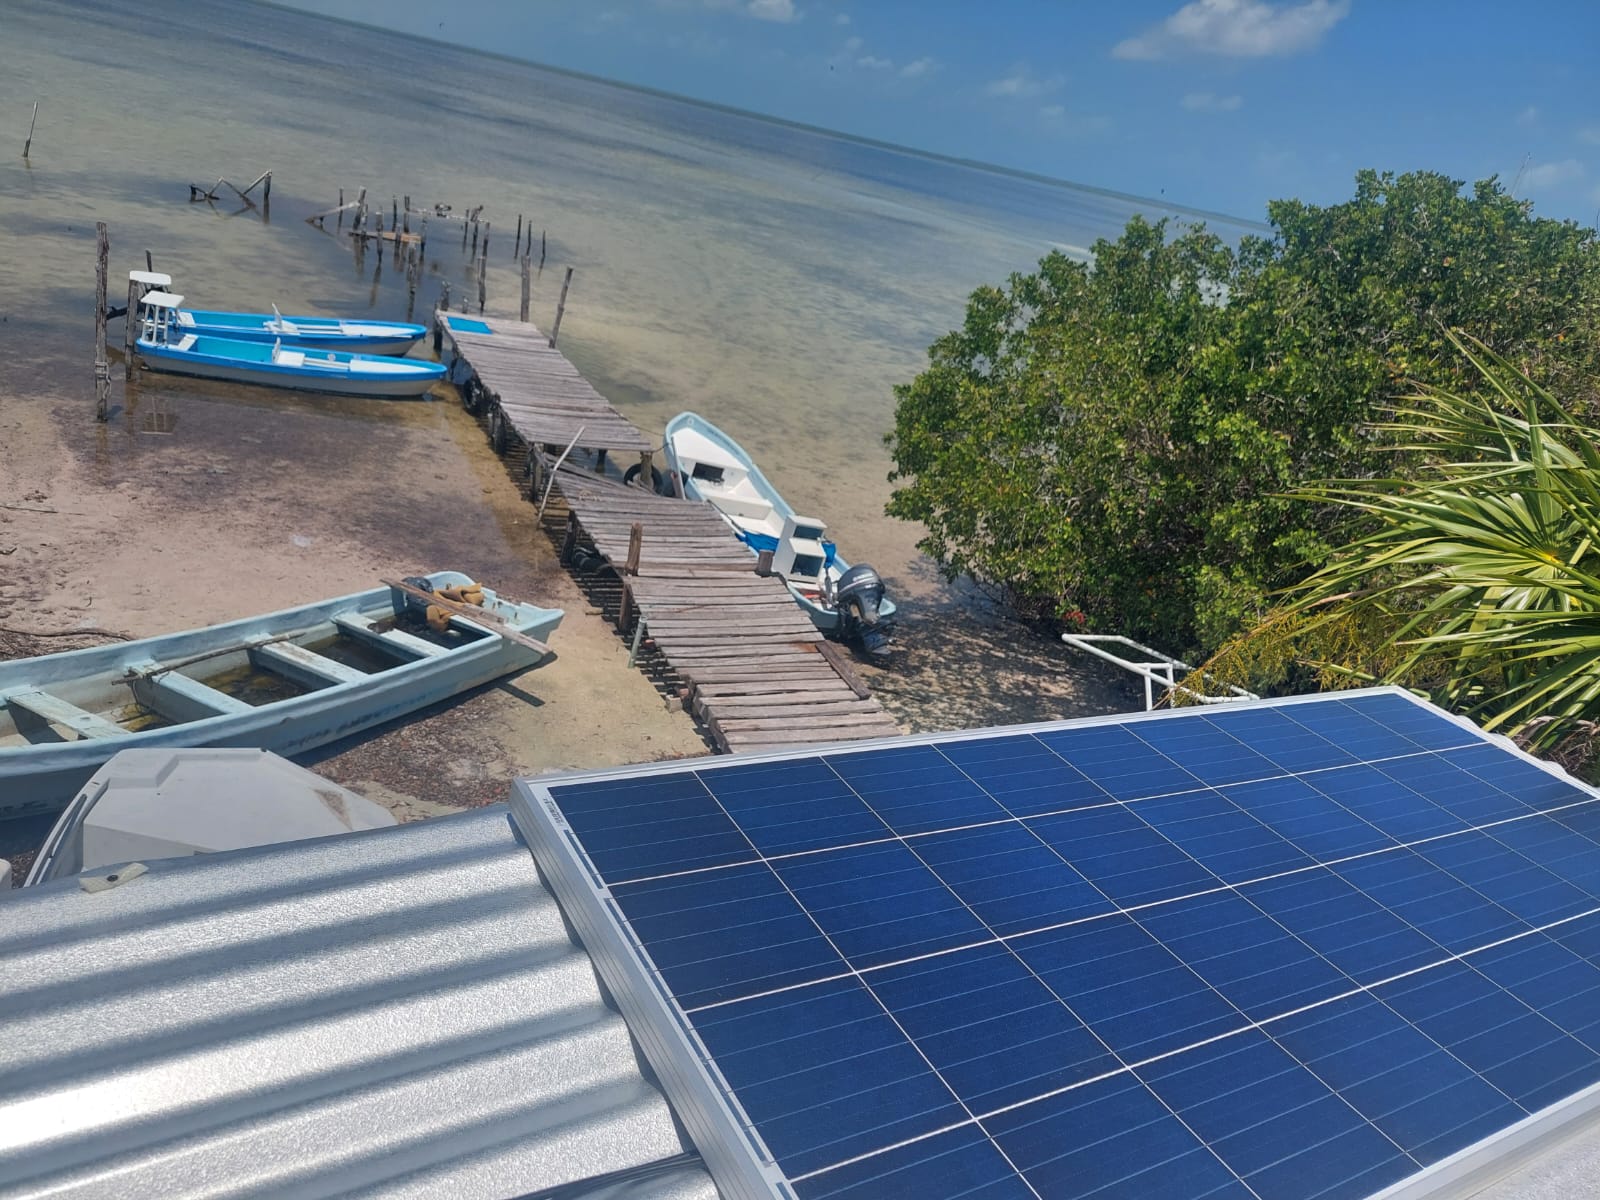 A solar panel on a dock above some fishing boats